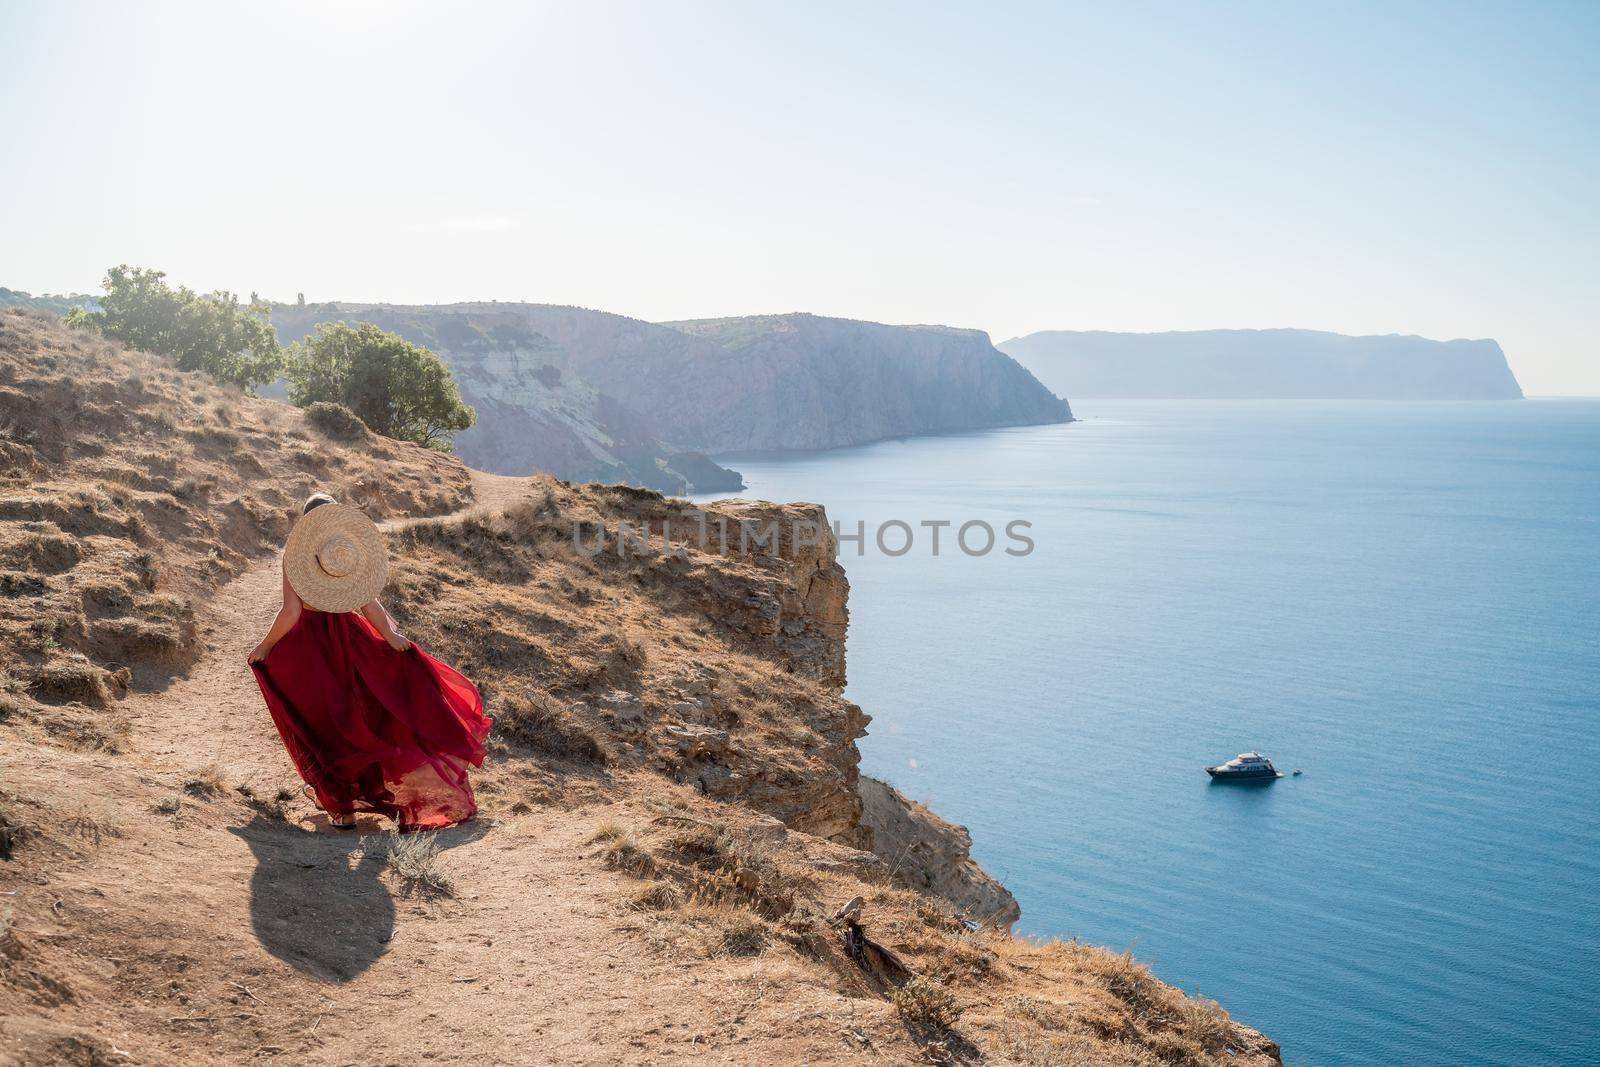 A woman in a red flying dress fluttering in the wind, against the backdrop of the sea